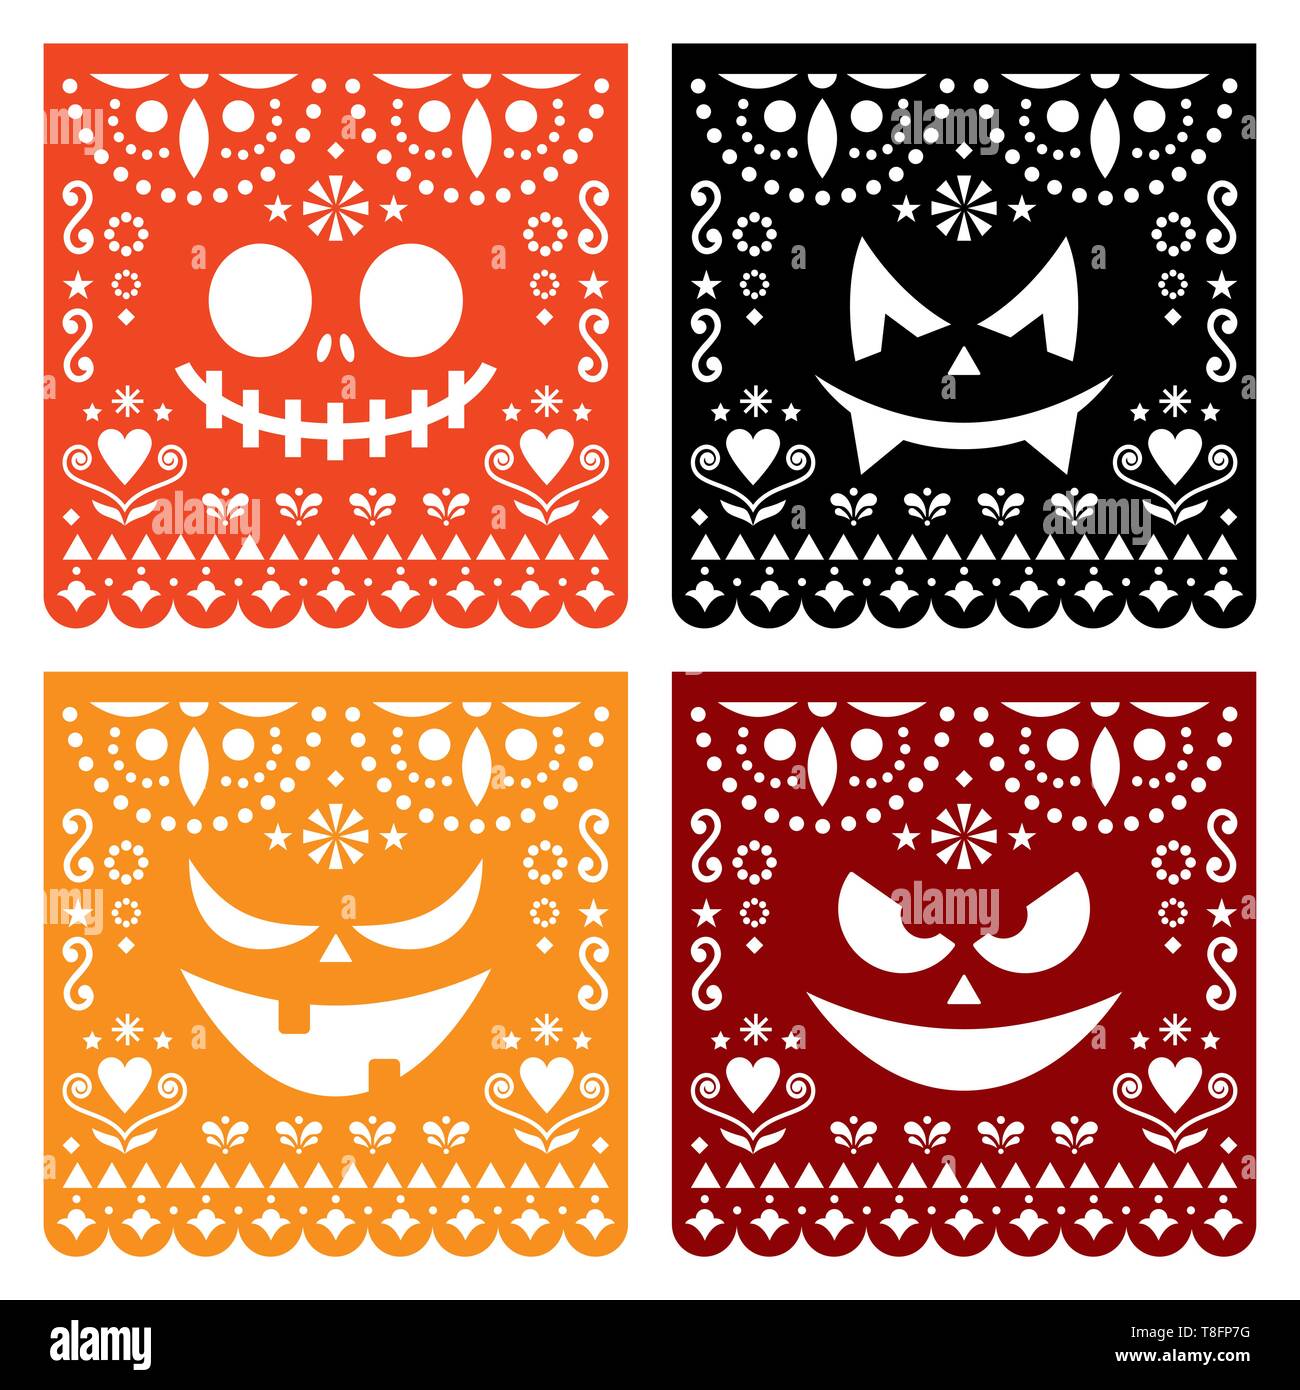 Halloween Papel Picado design with pumpkin scary faces, Mexican paper cut out pattern collection - Dia de Los Muertos, Day of the Dead Stock Vector